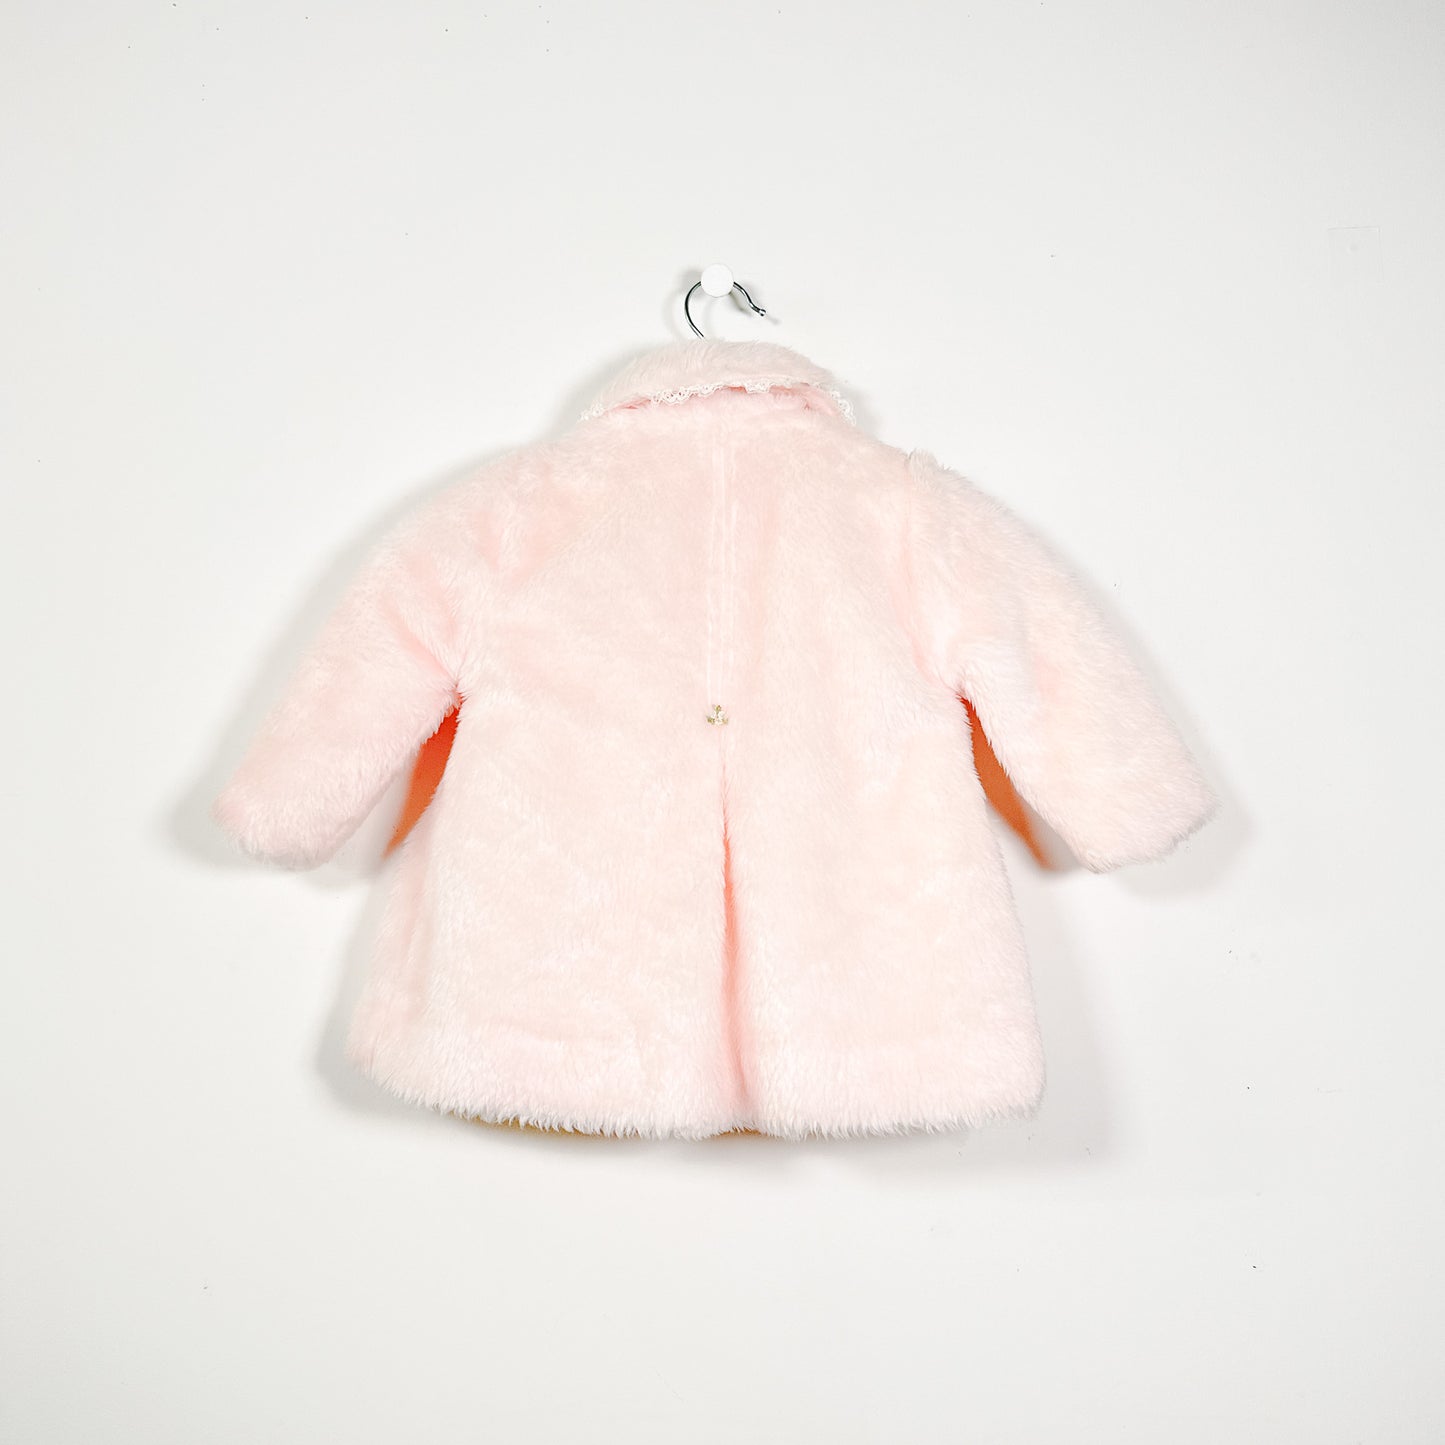 80's Vintage Pink Fur Swing Coat with Rosebud Accents - Size 2-3yr